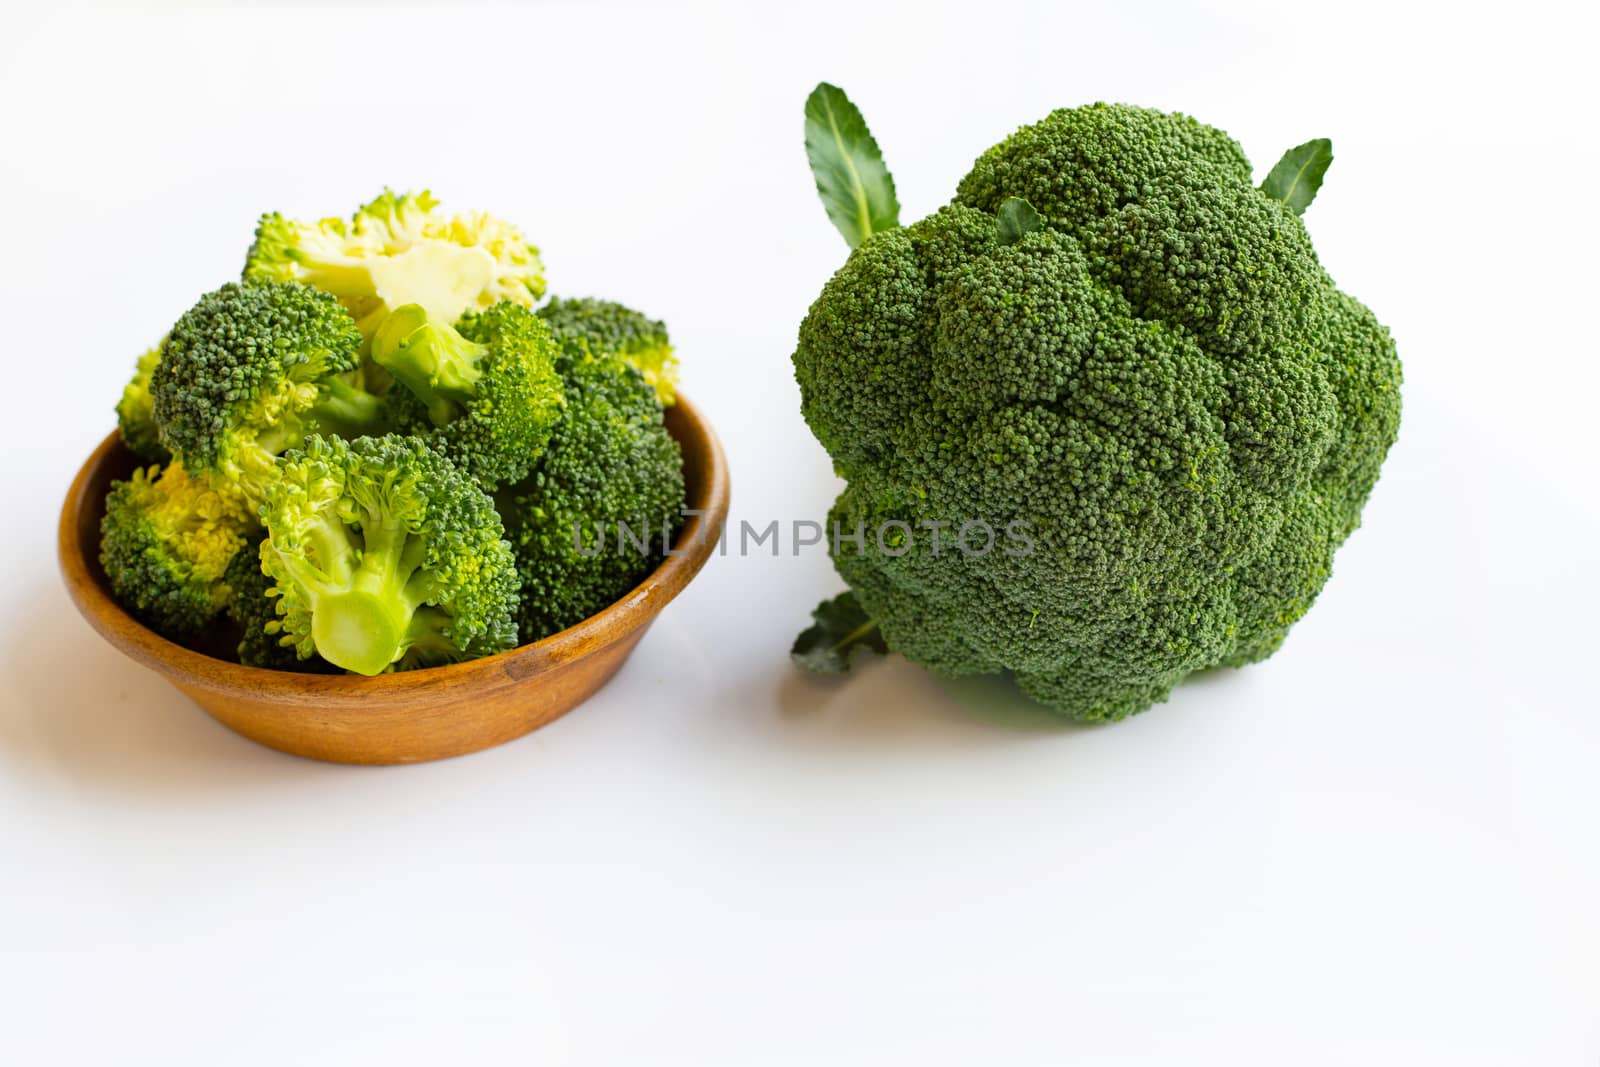 Broccoli on white background
 by Bowonpat